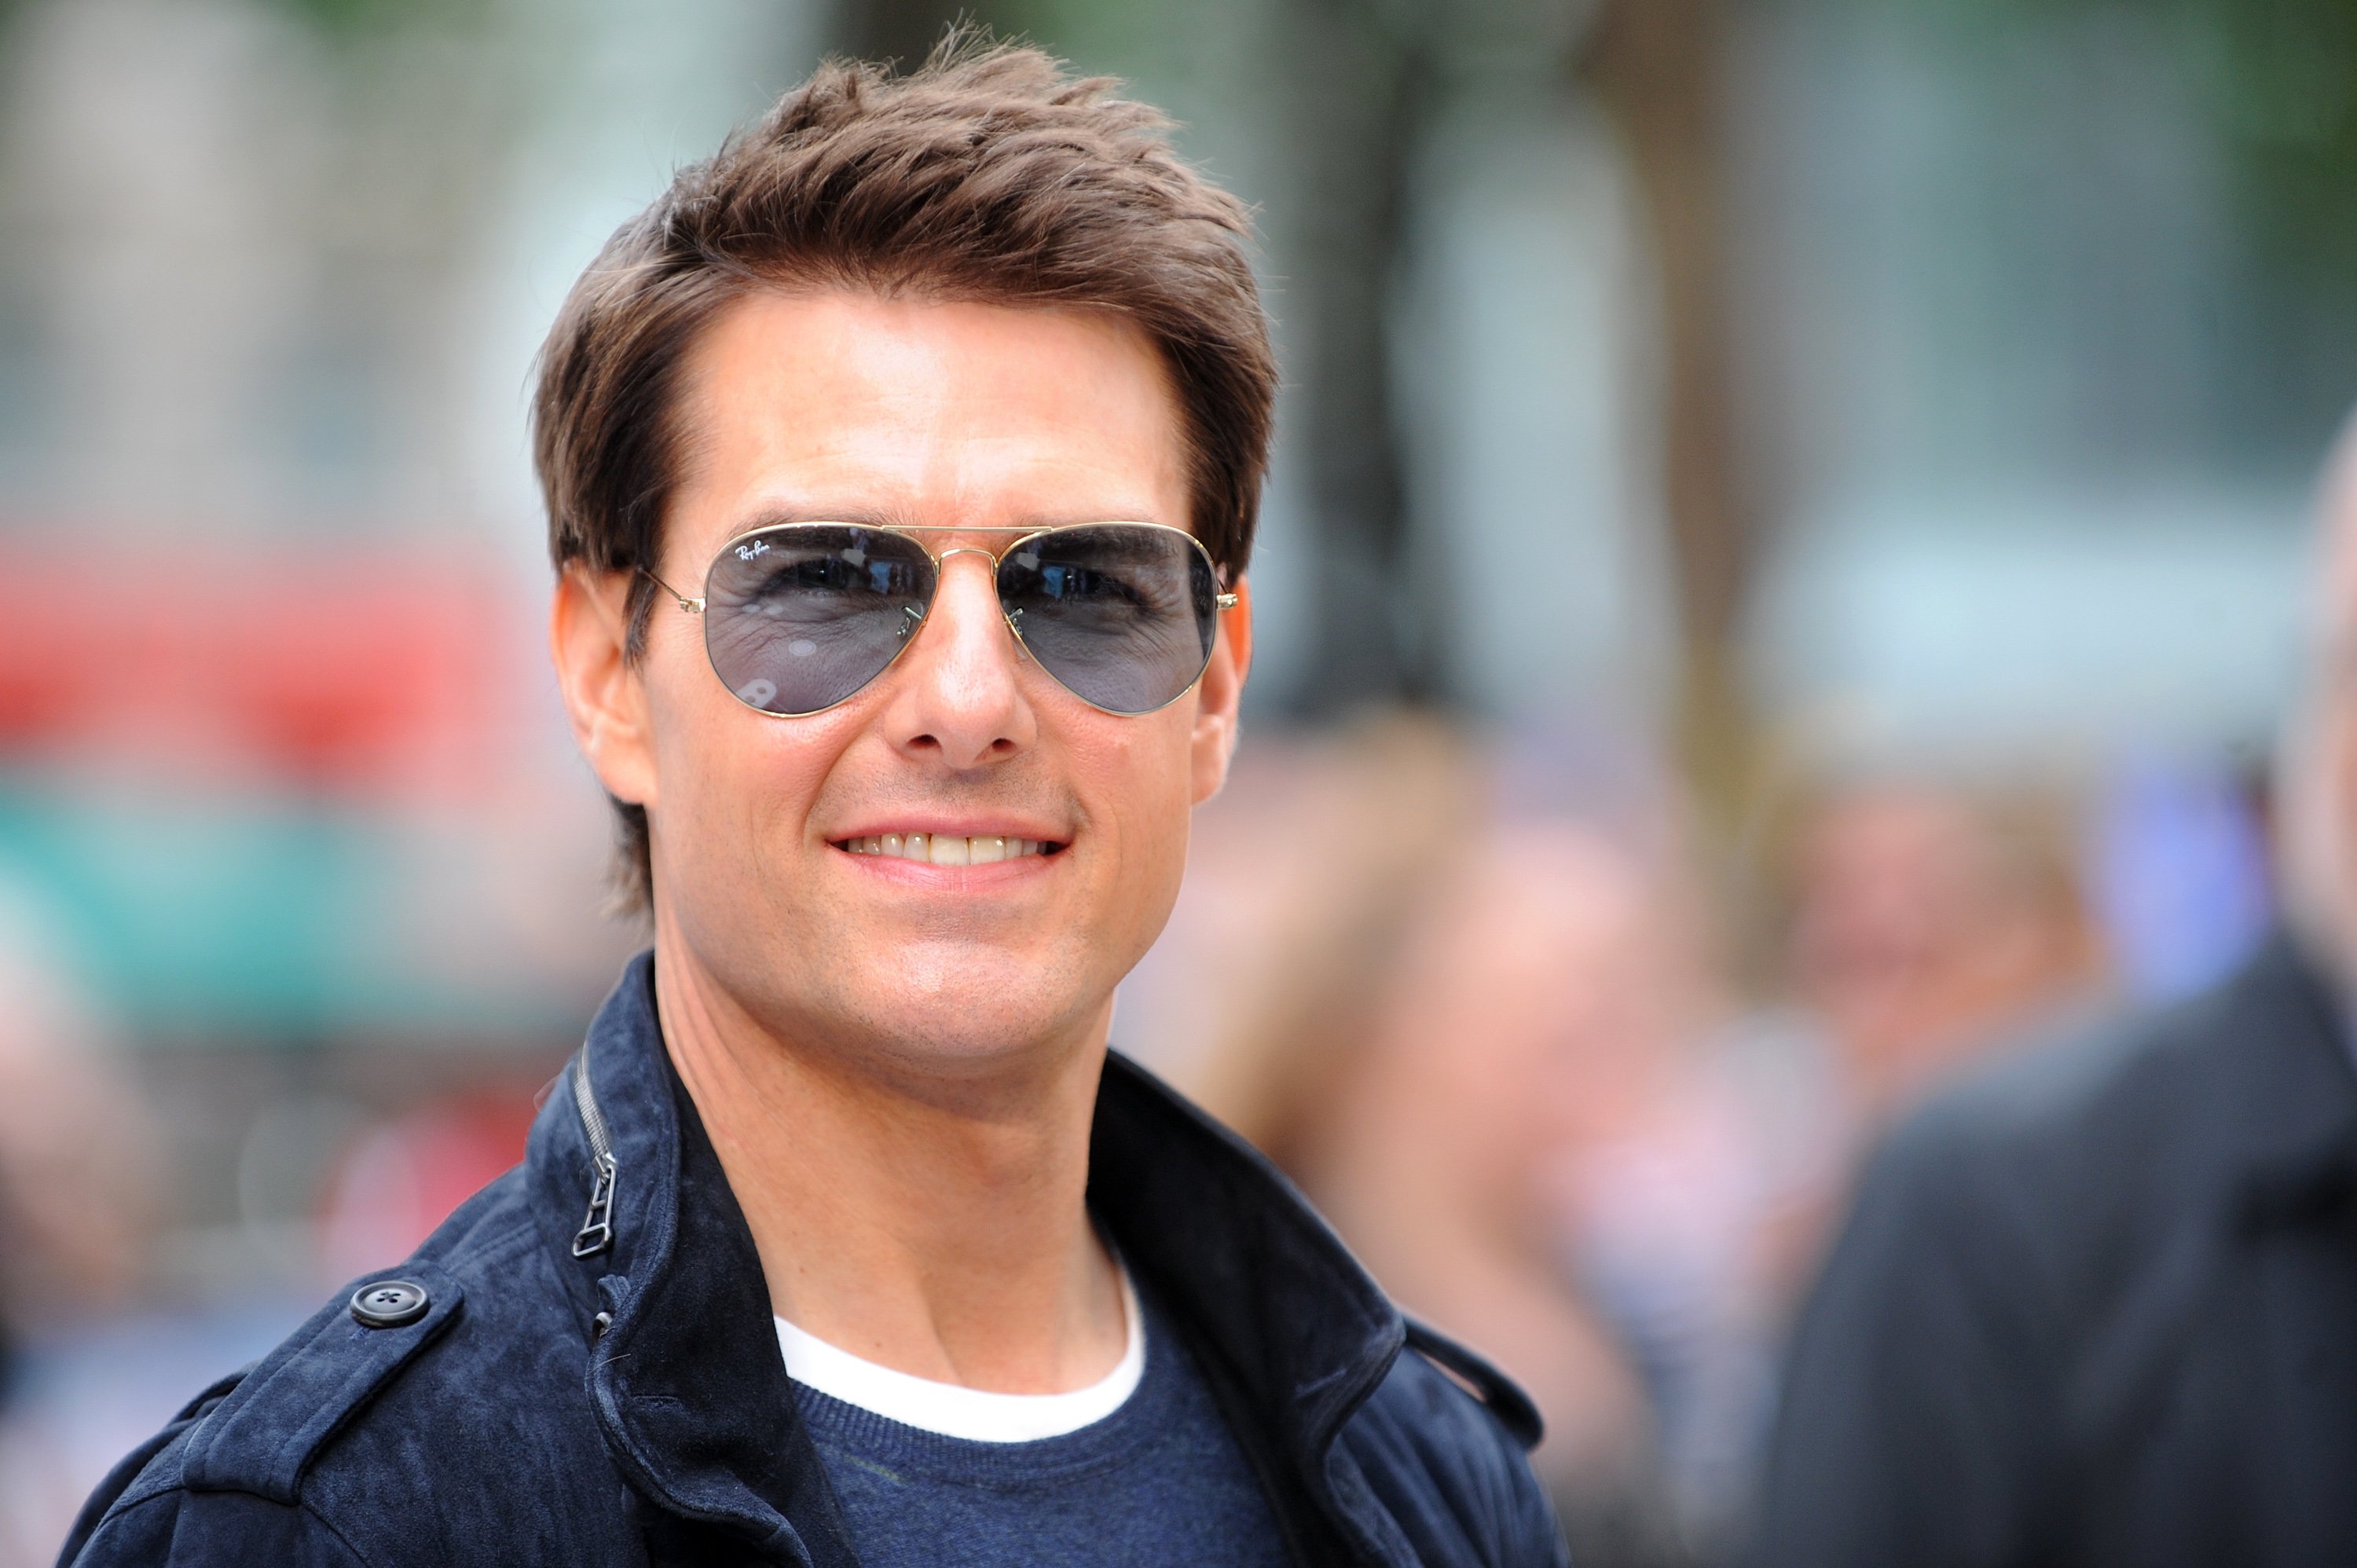 Tom Cruise attends the European premiere of "Rock Of Ages" at Odeon Leicester Square on June 10, 2012, in London, England. | Source: Getty Images.